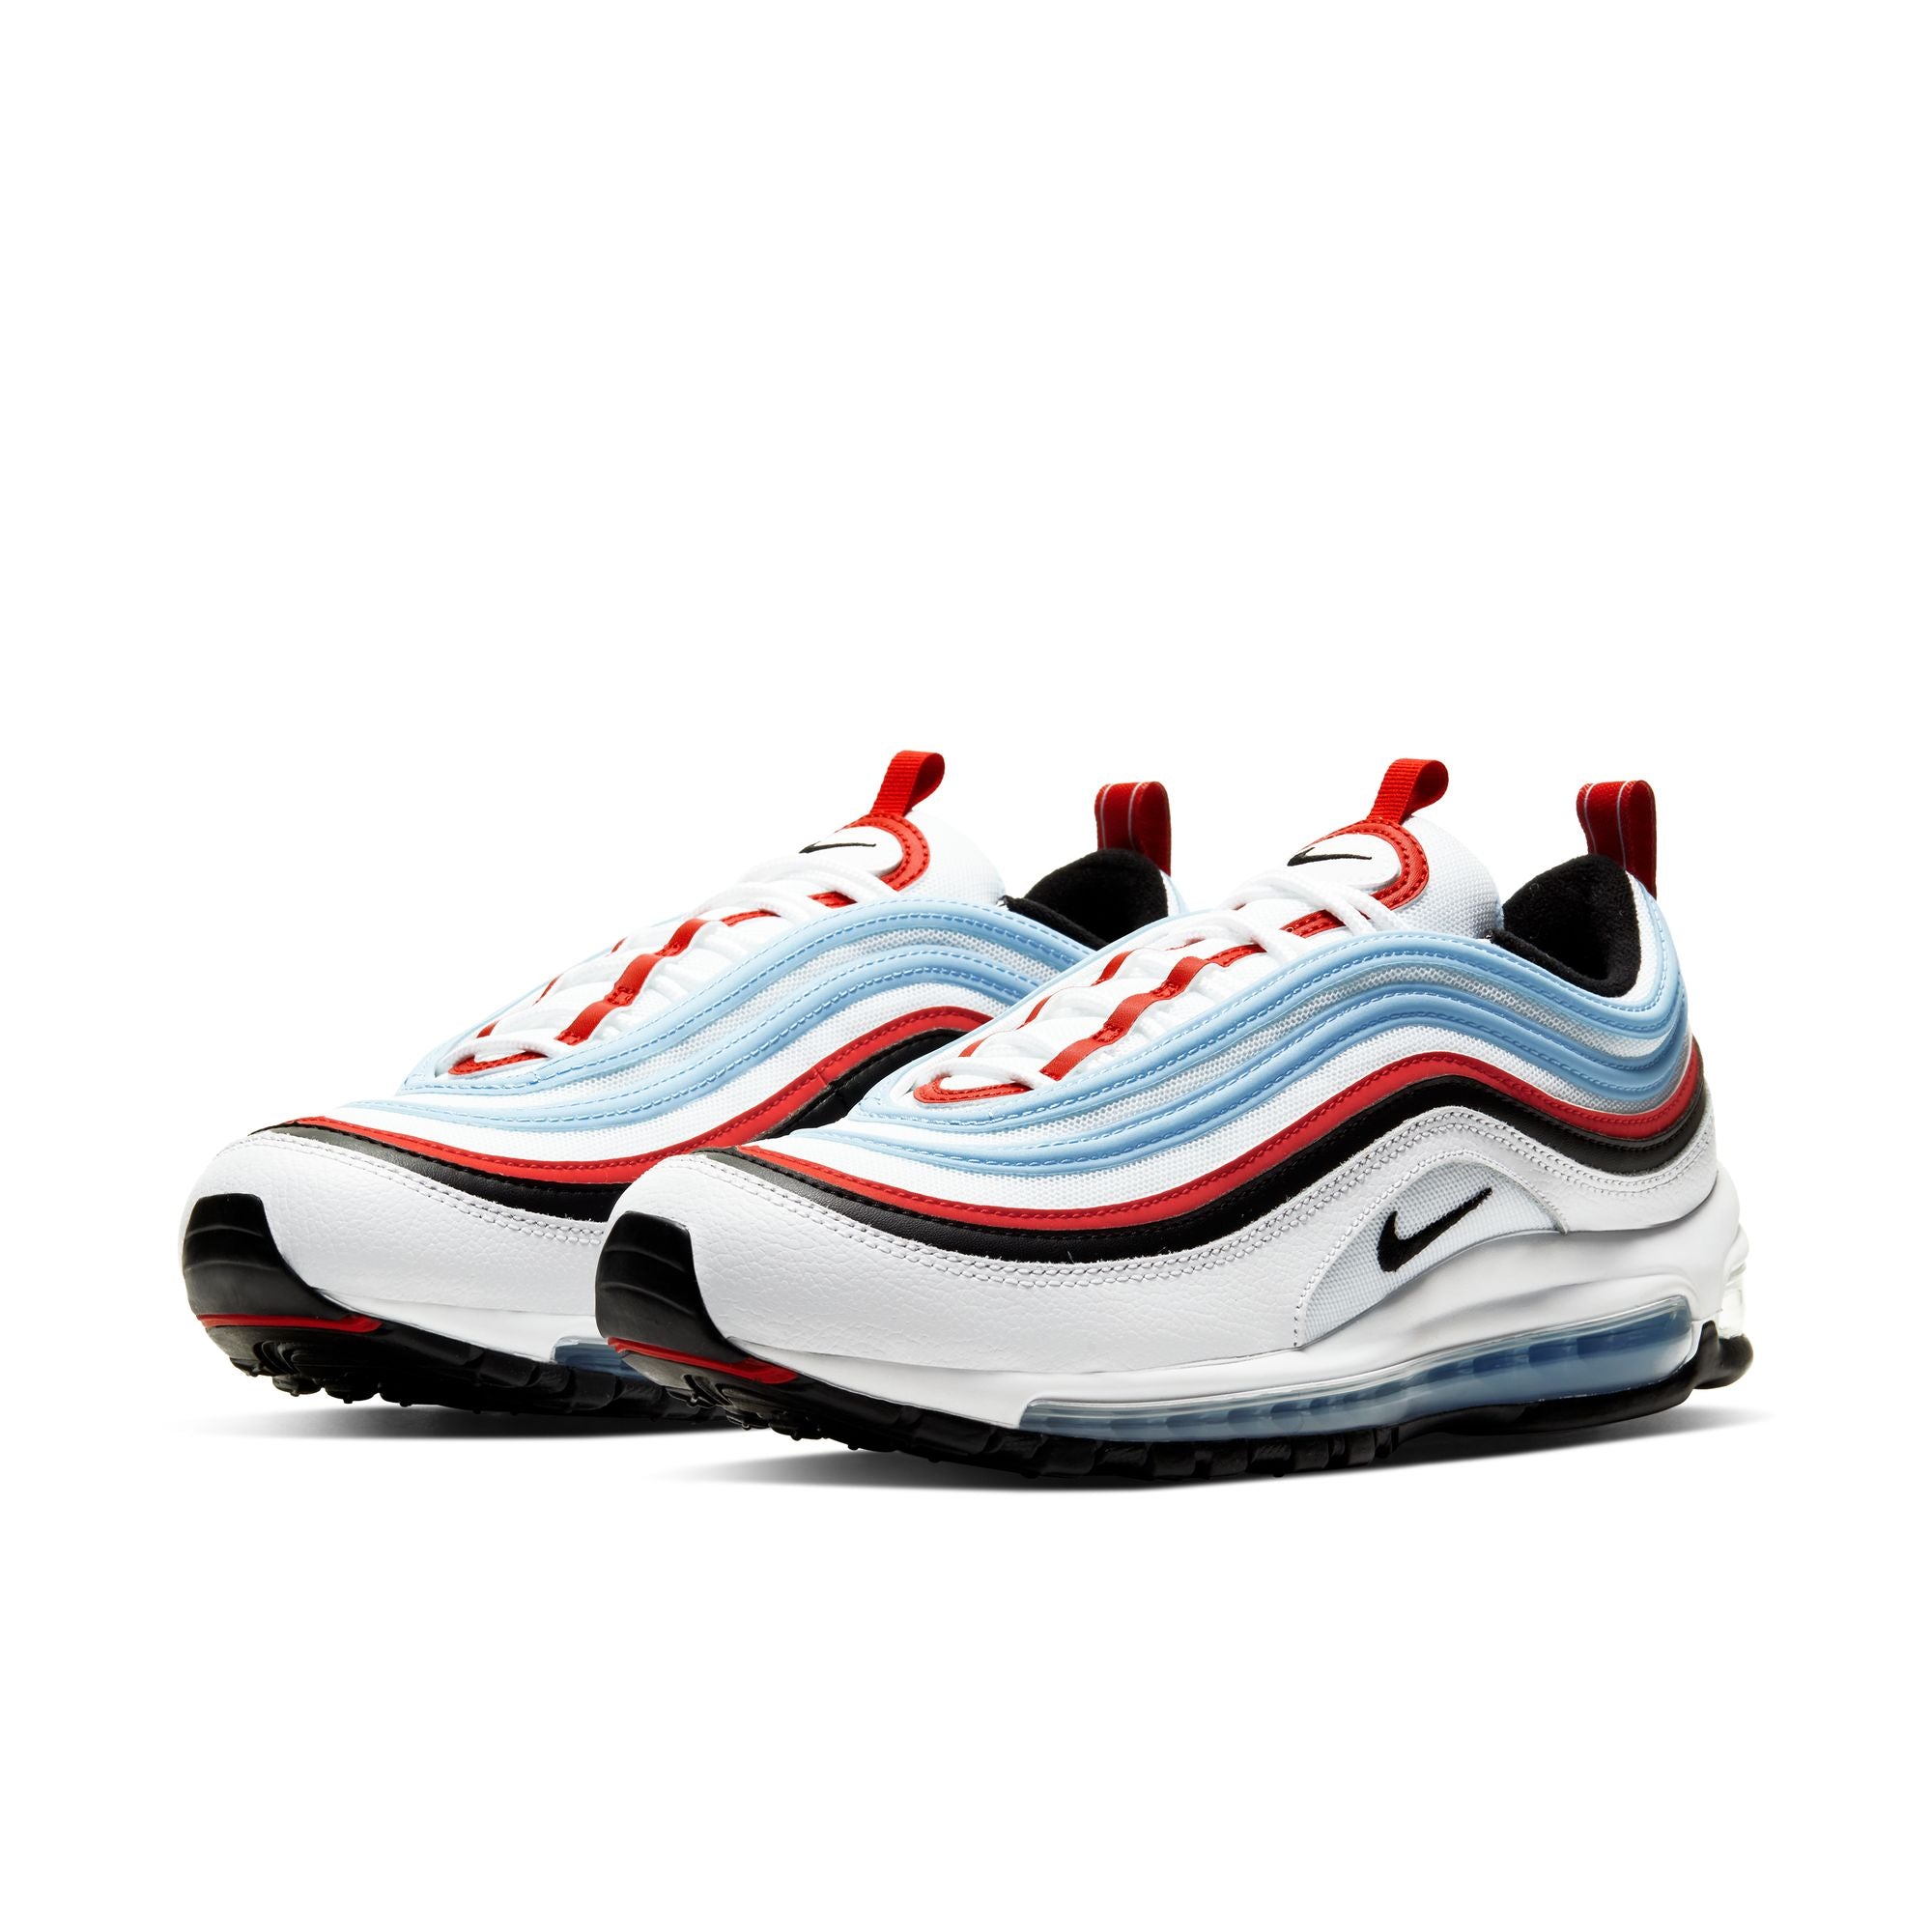 Nike Air Max 97 "Chicago" Men's Shoes